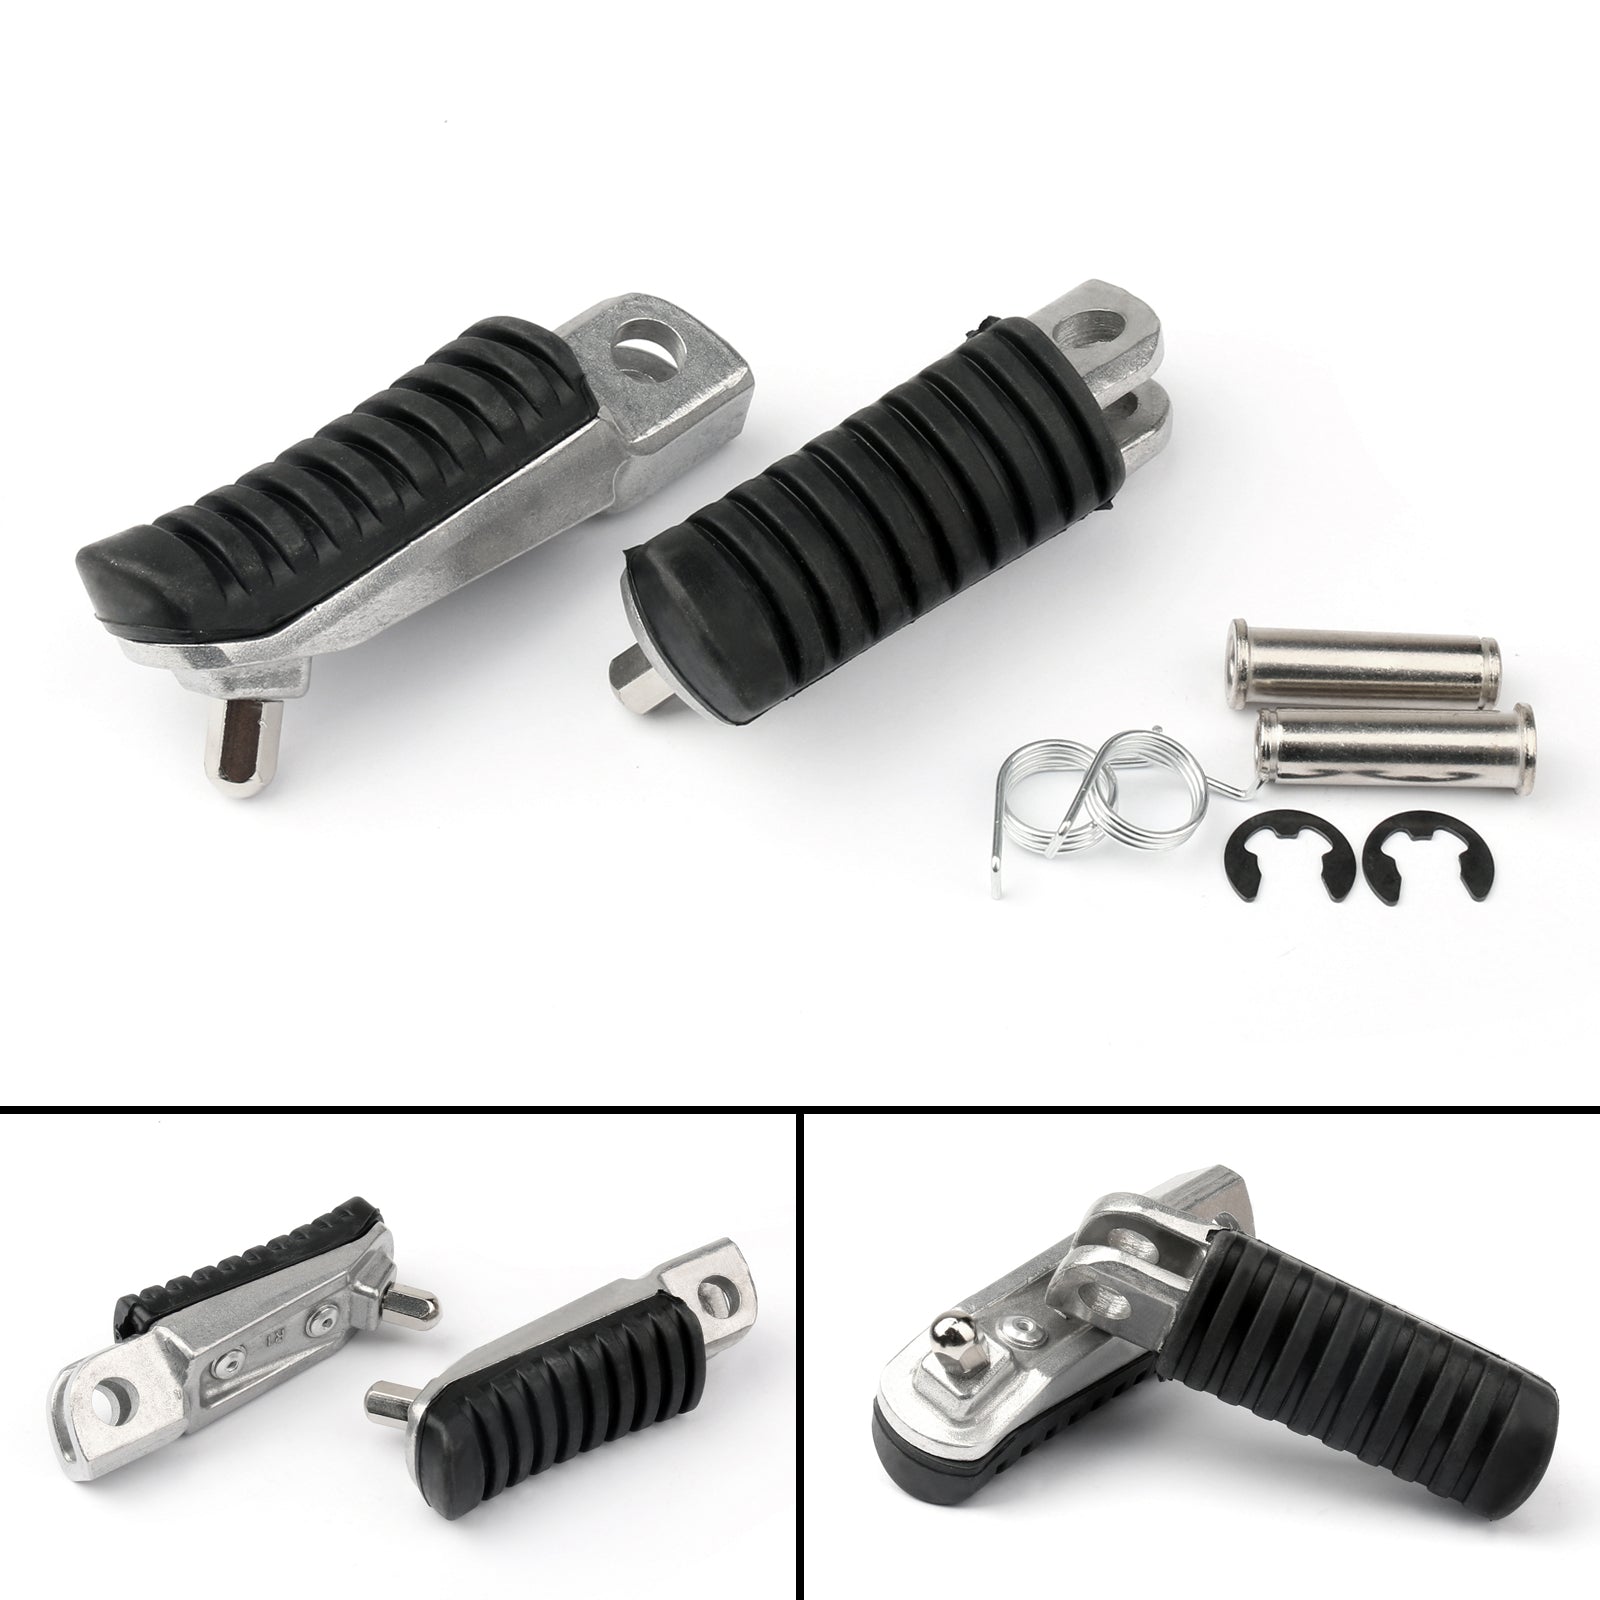 Front Footrest Pedals Foot Pegs Fit For Kawasaki ZRX1100 97-98 ZR750 ZR-7 99-03 Z750 04-12 ER-6N 06-14